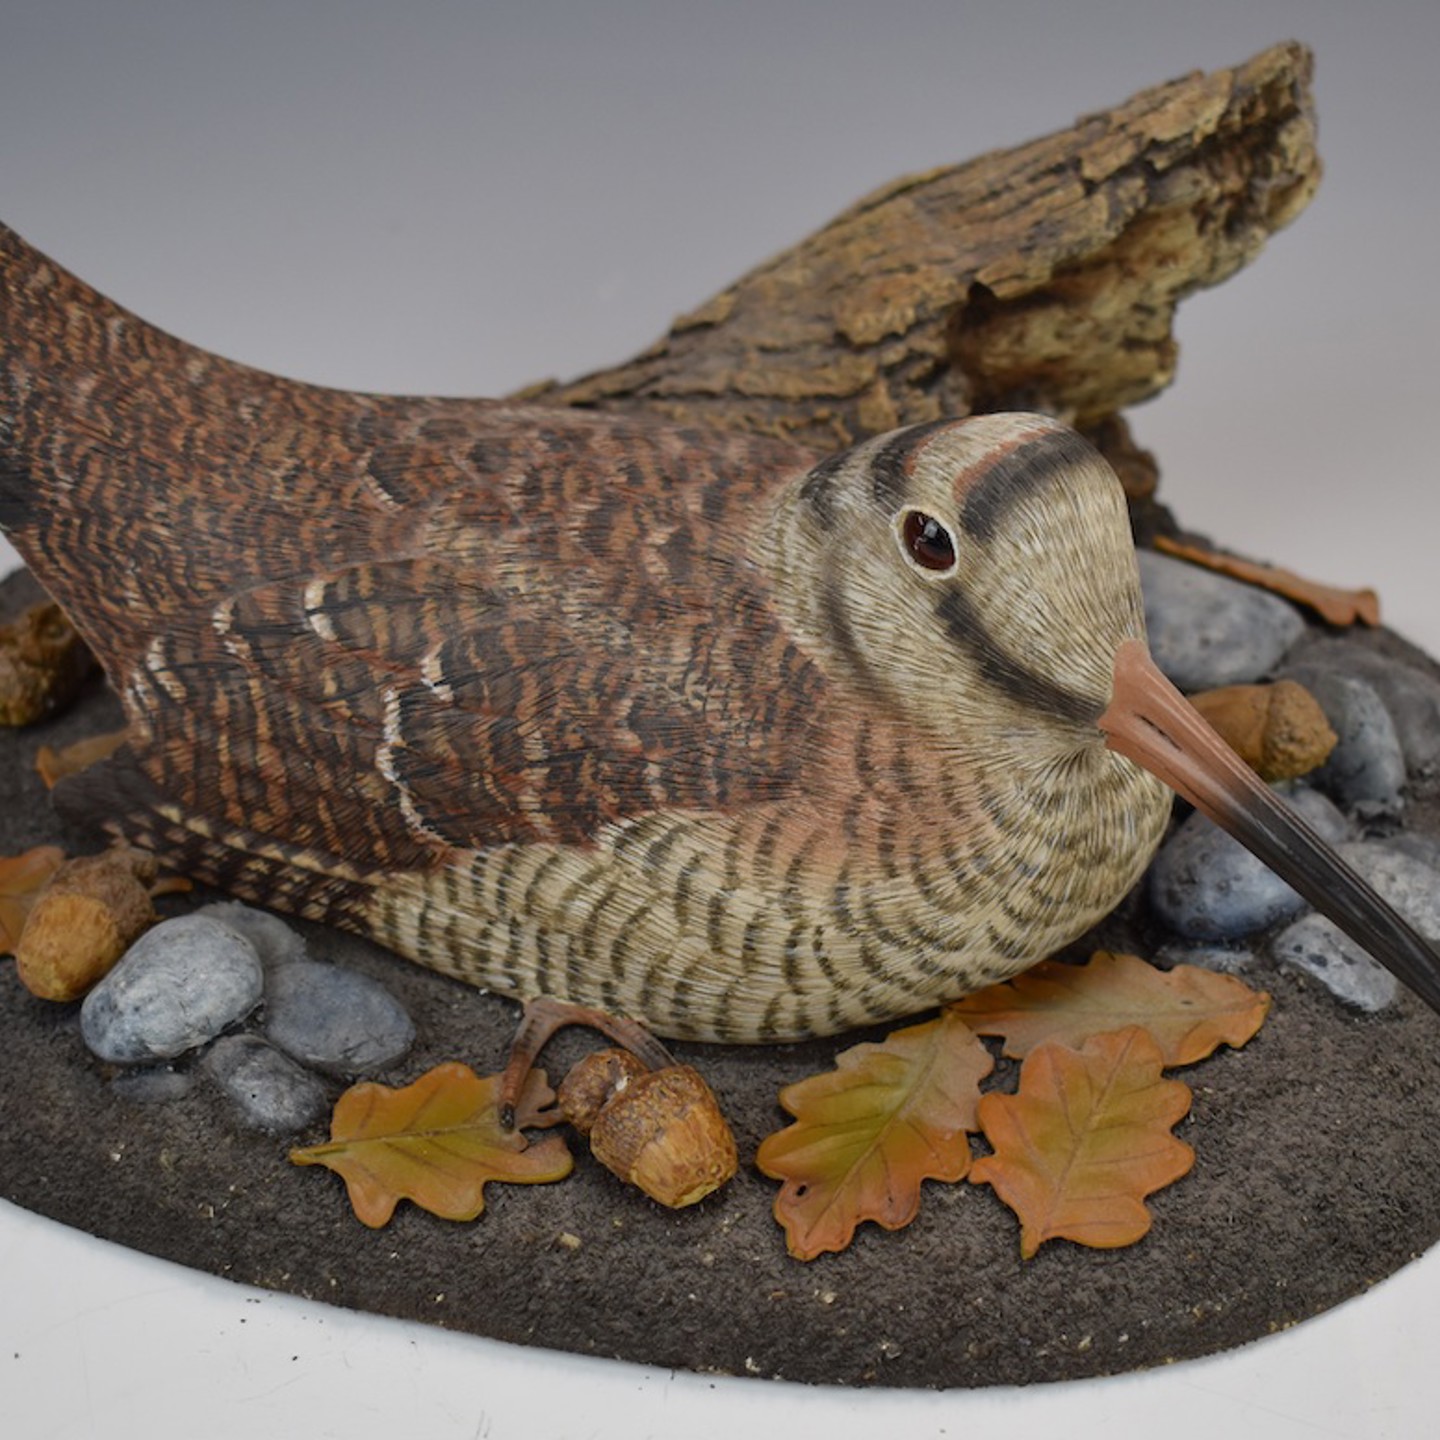 Mike Wood Hand Carved Wooden Bird Sculpture Of A Woodcock, Signed And Dated March 2007 To Base, Sold For £550